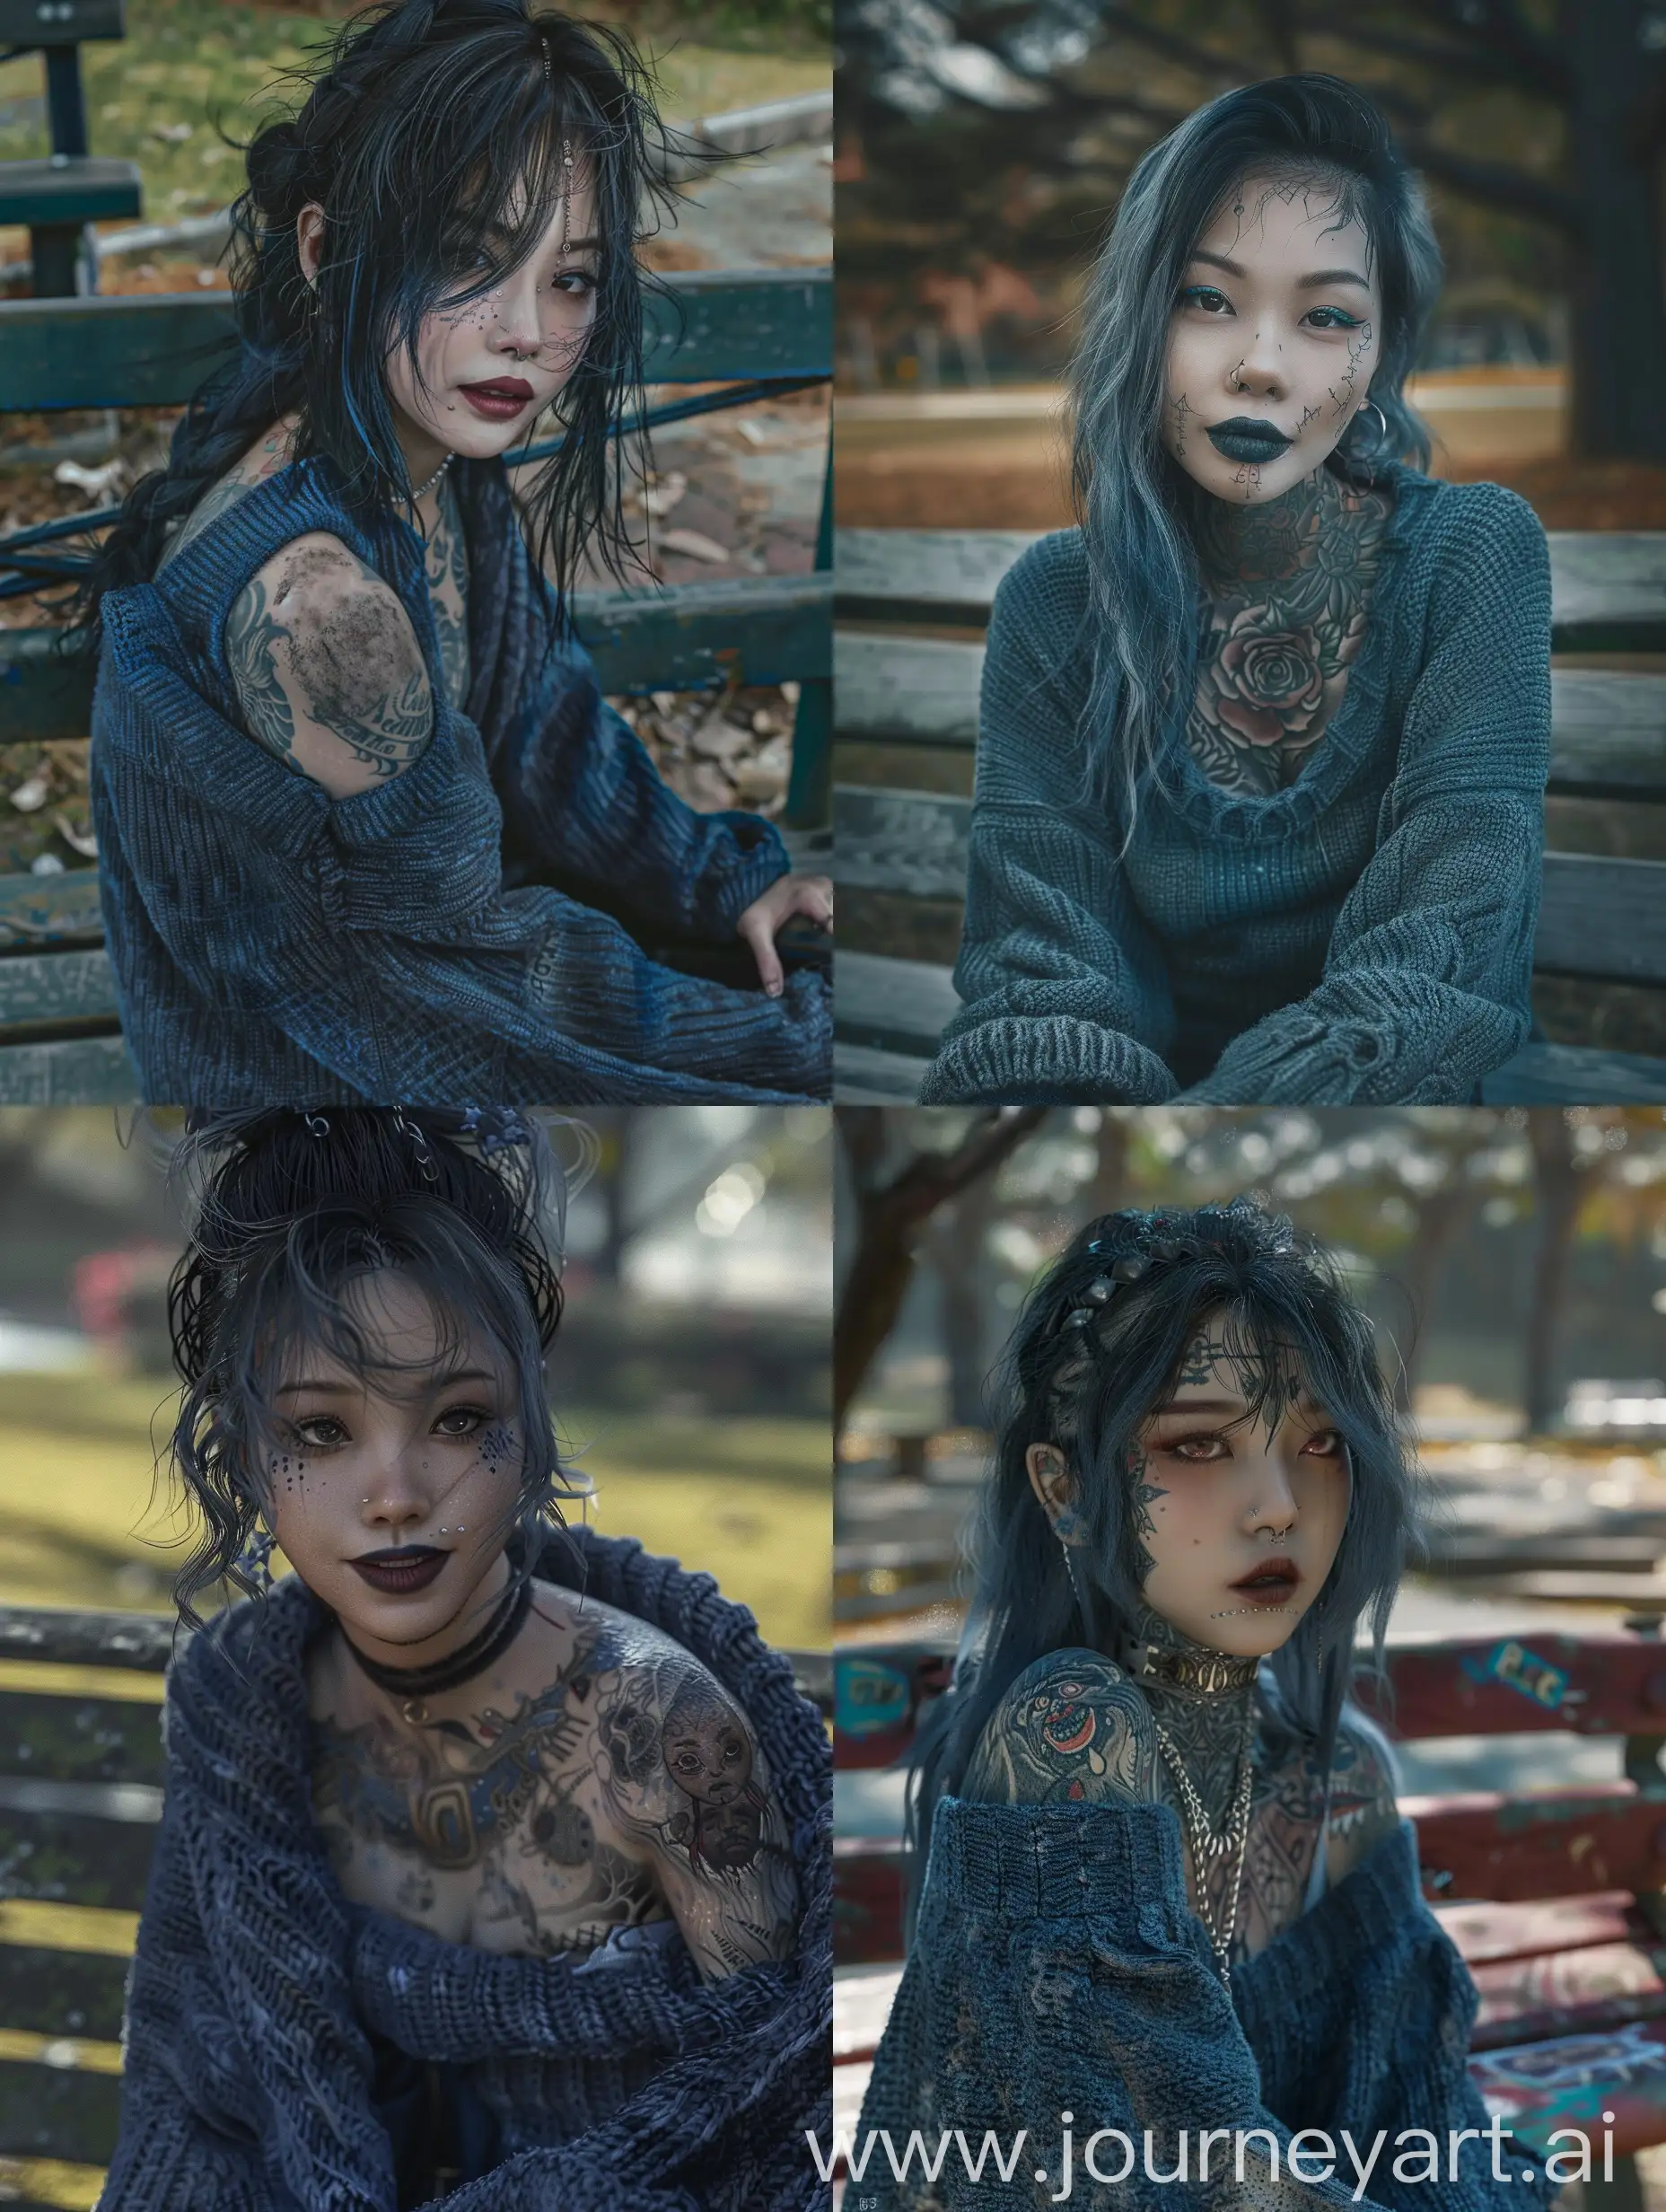 korean woman, punk, heavily tattooed, homemade crooked tattoos, blurry faded tattoos, dark gray tattooed lips, punk goth, wearing dirty blue sweater, disheveled unkempt hair, sitting on park bench, tired smile, looking at viewer, photo photorealistic